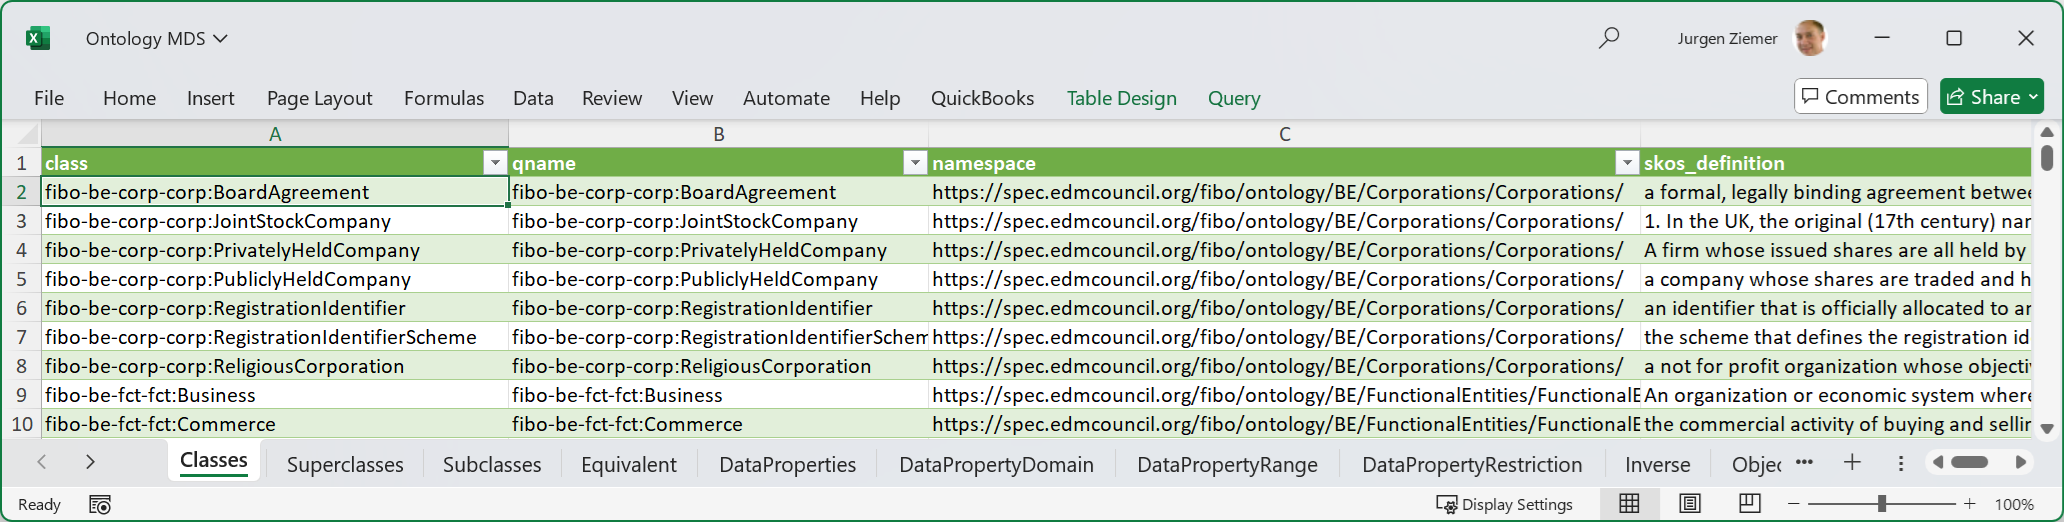 FIG 6 is an MS Excel screenshot of the Ontology Metadata Set.